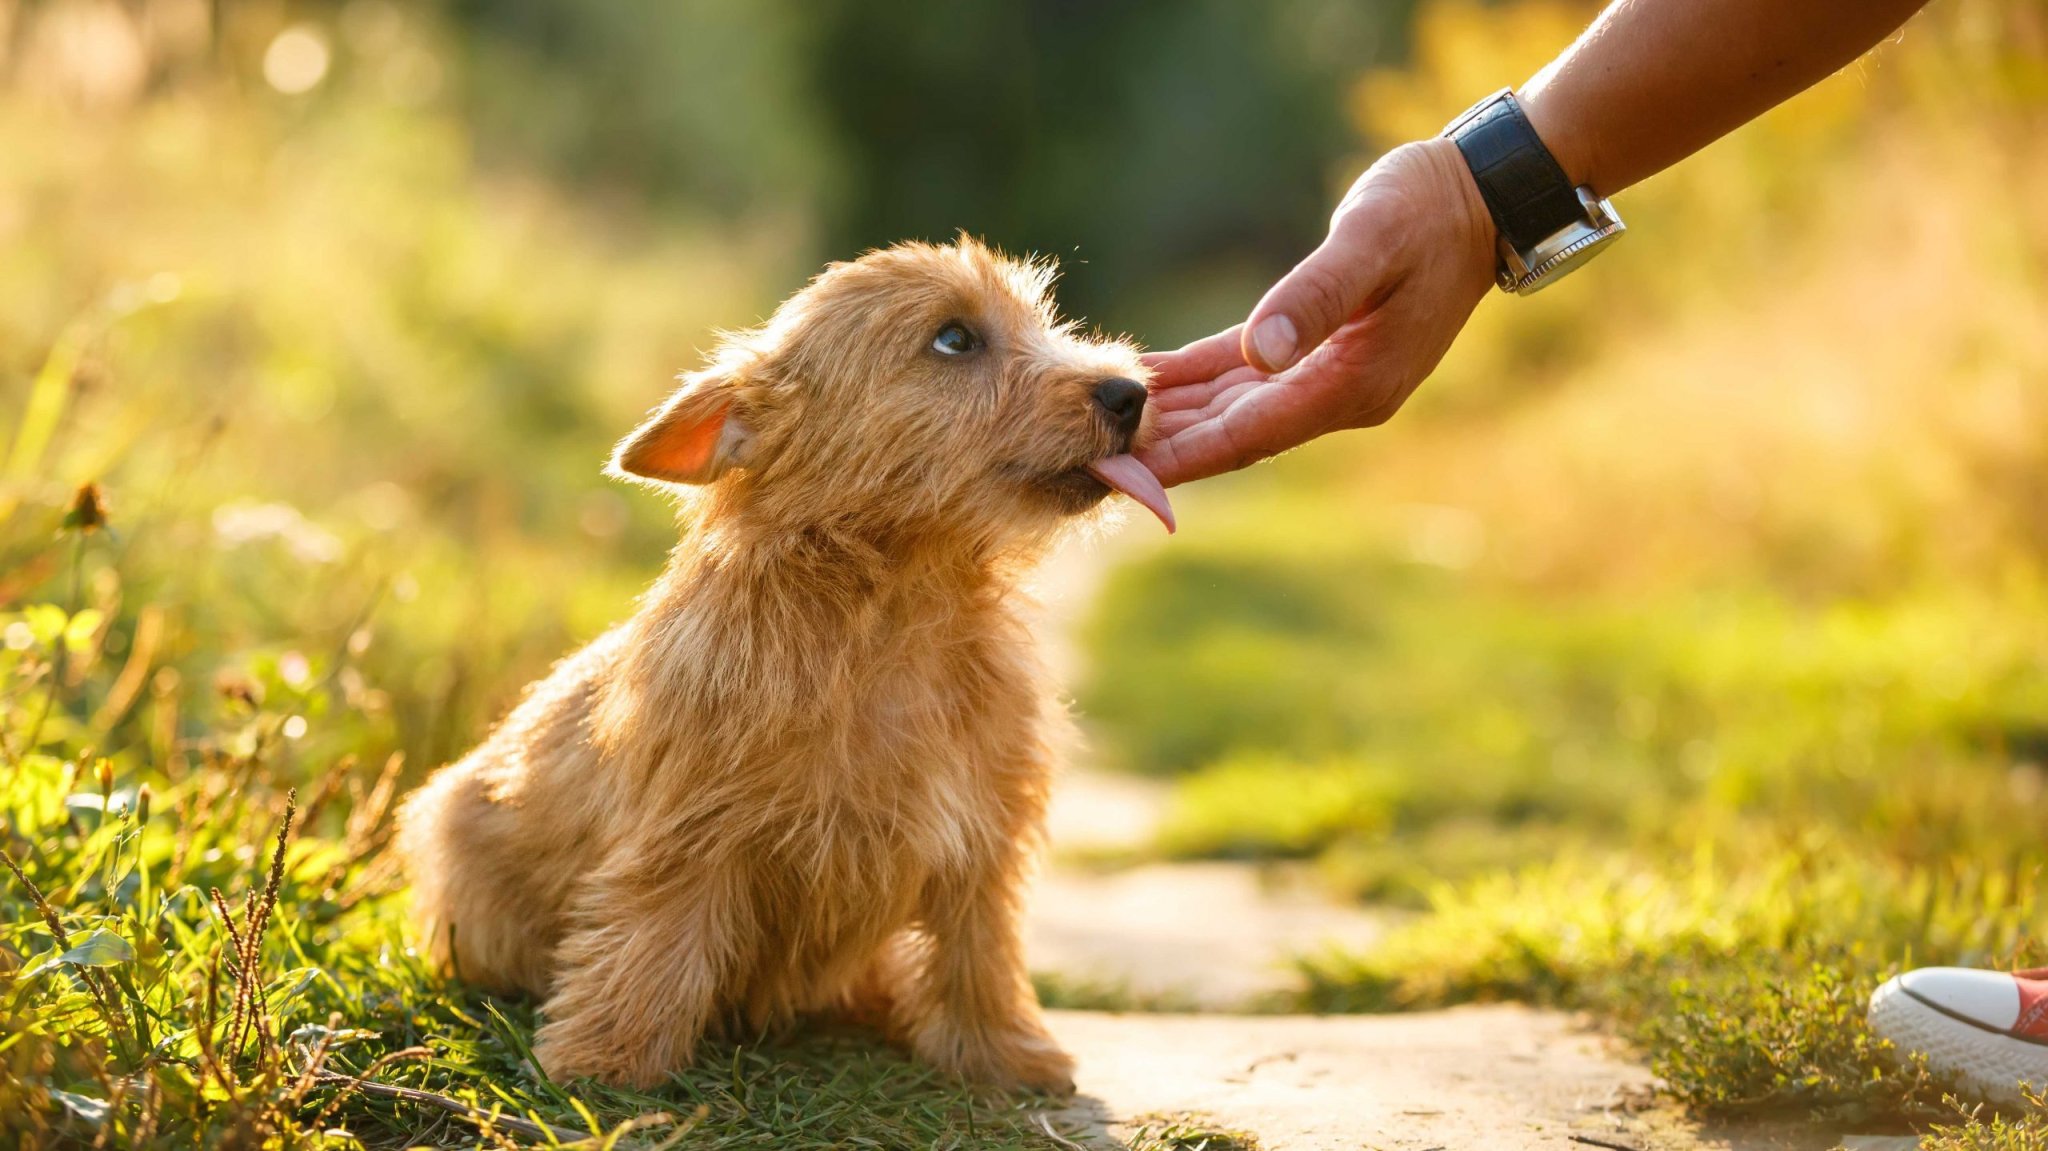 What Does It Mean When a Dog Licks You?